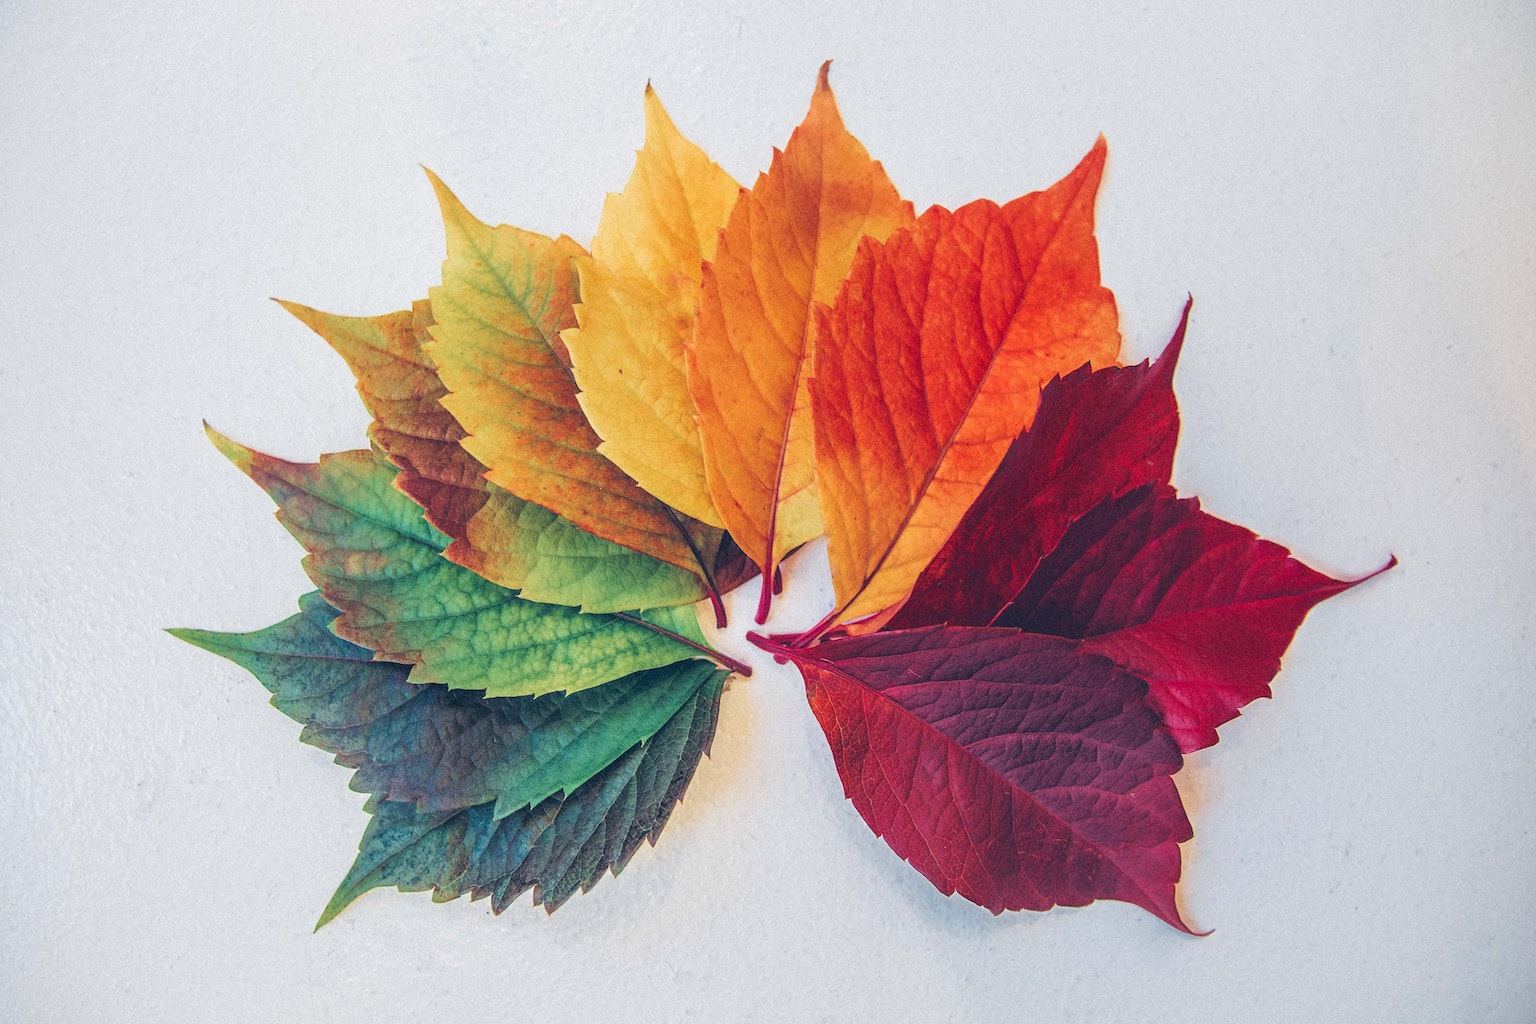 Leaves in a rainbow of colours from red to green